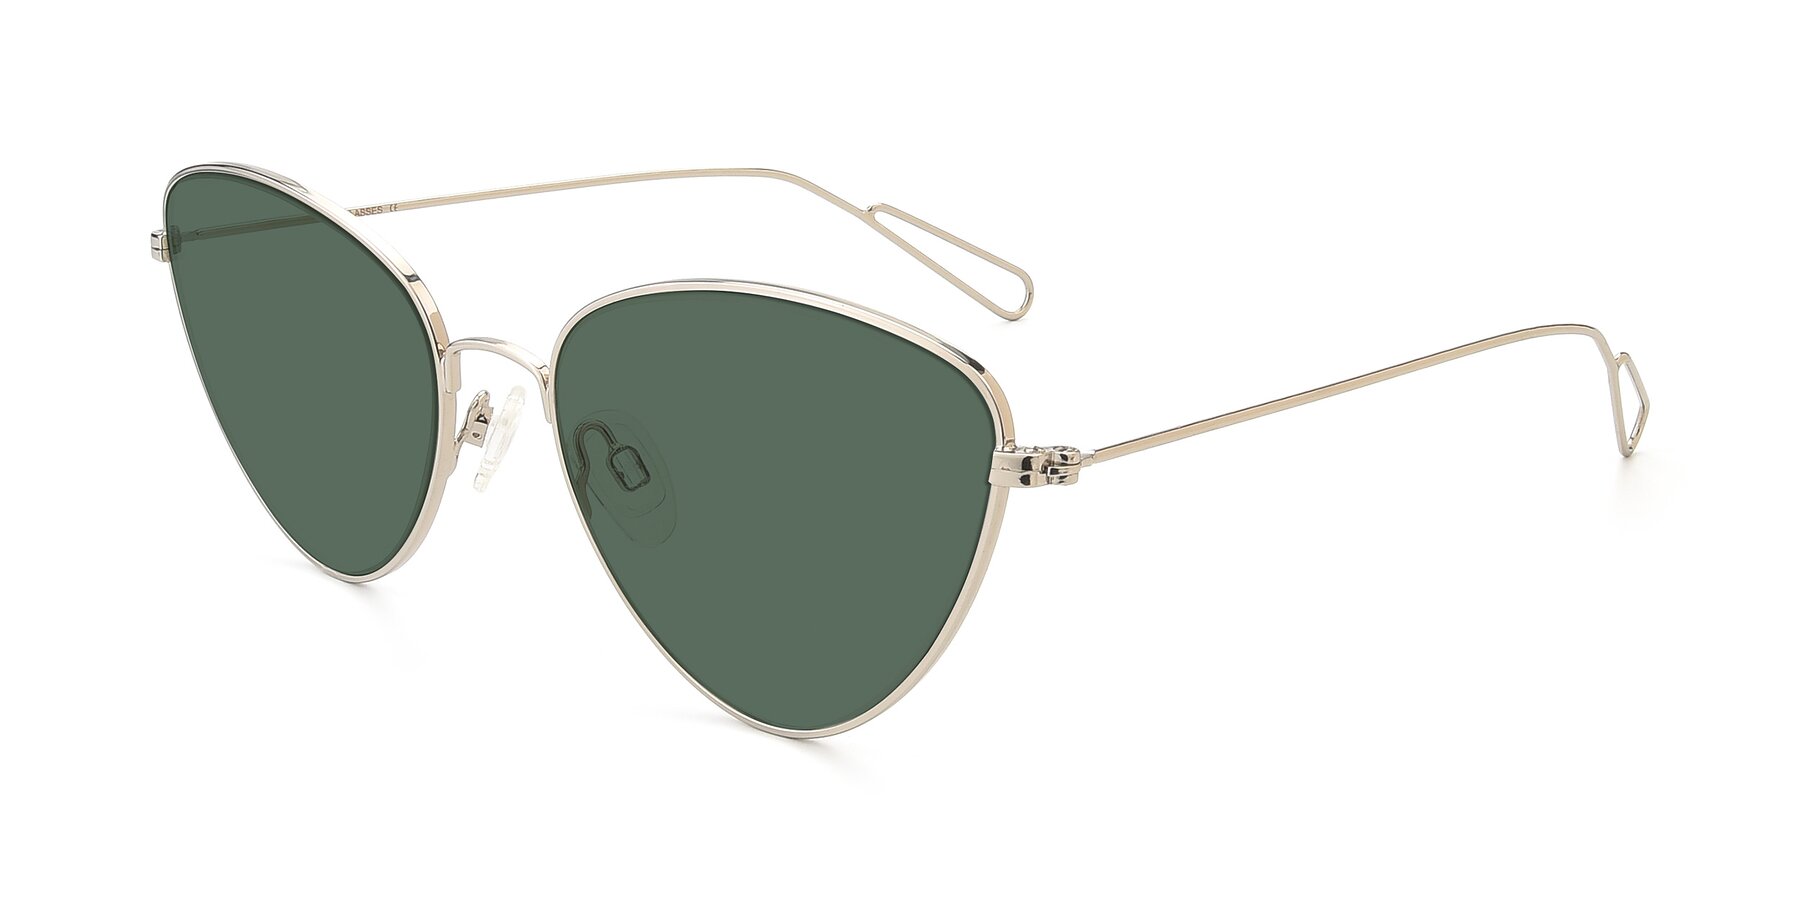 Angle of Butterfly Effect in Silver with Green Polarized Lenses